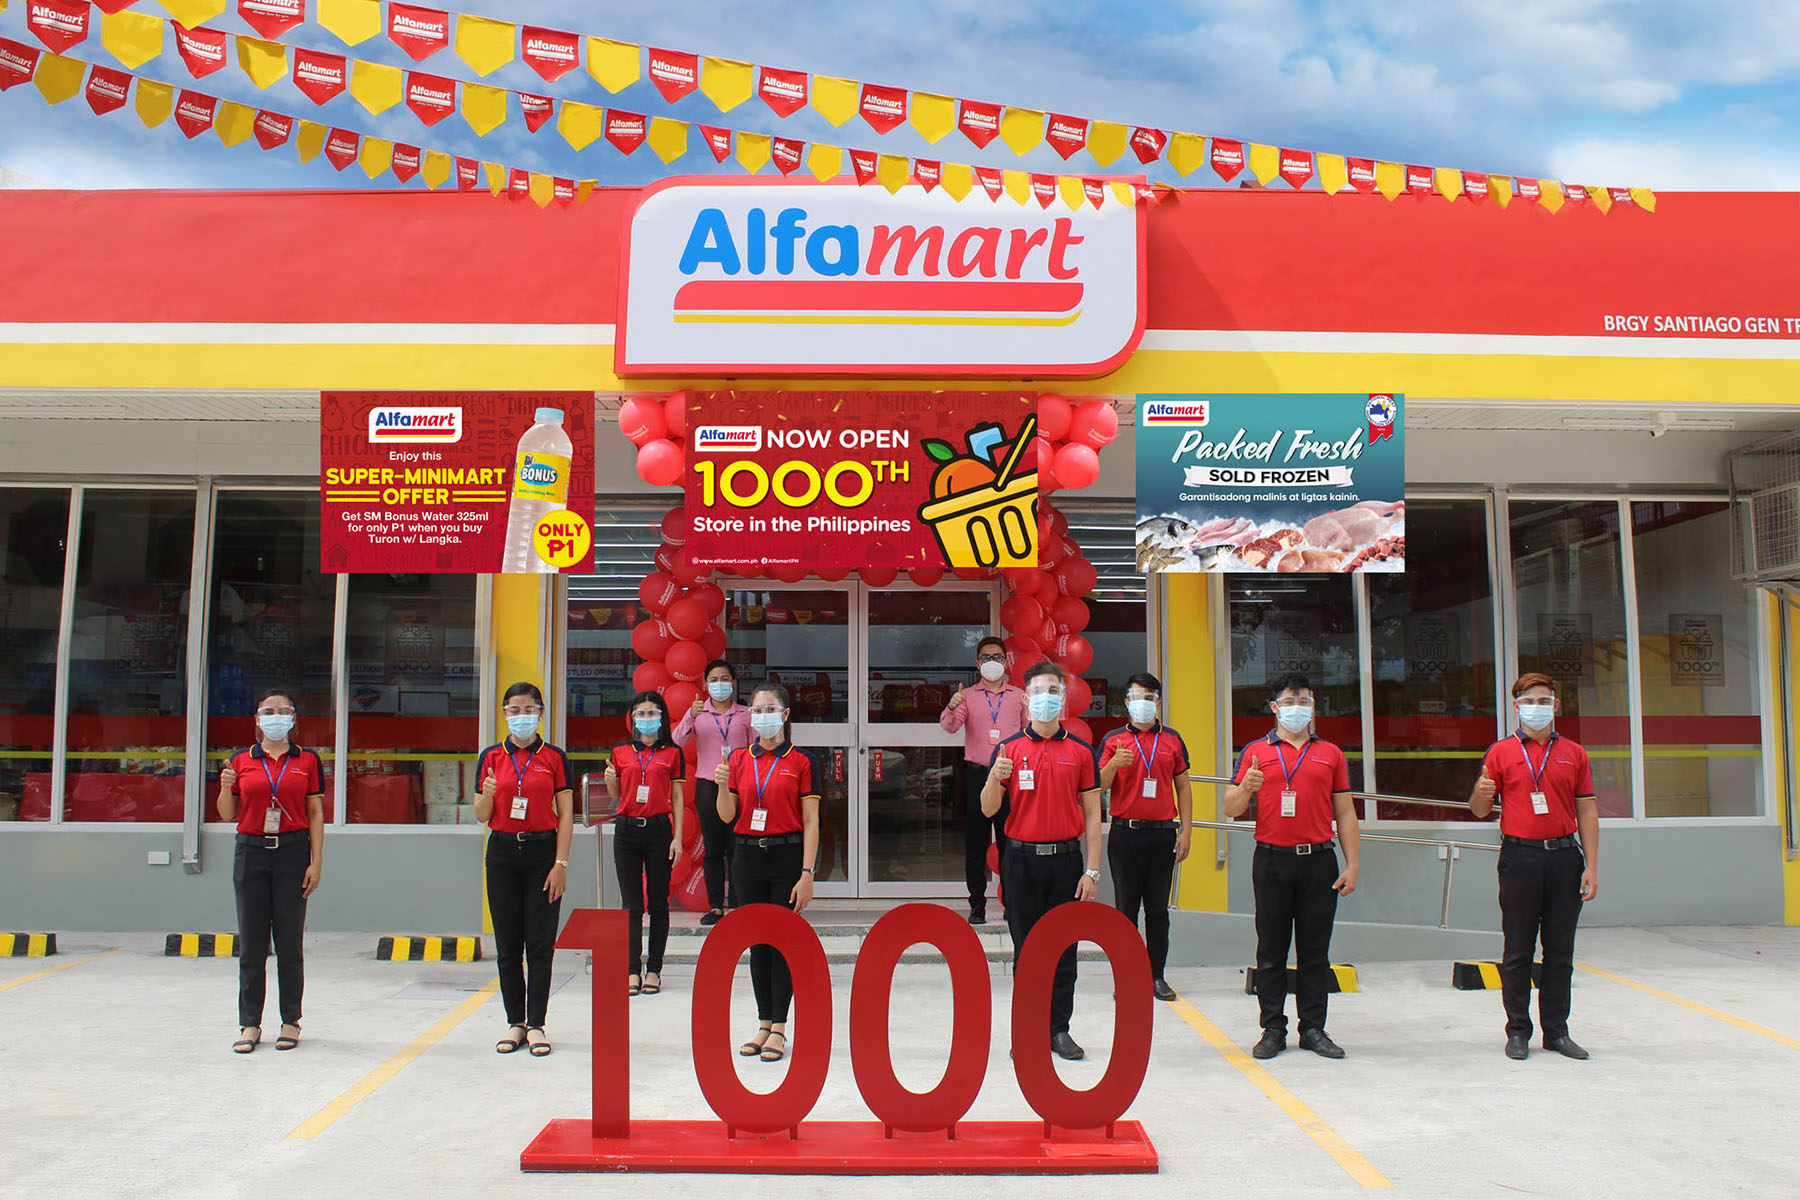 Alfamart proudly opens 1000th store continues expansion and serve loyal customers amid the pandemic